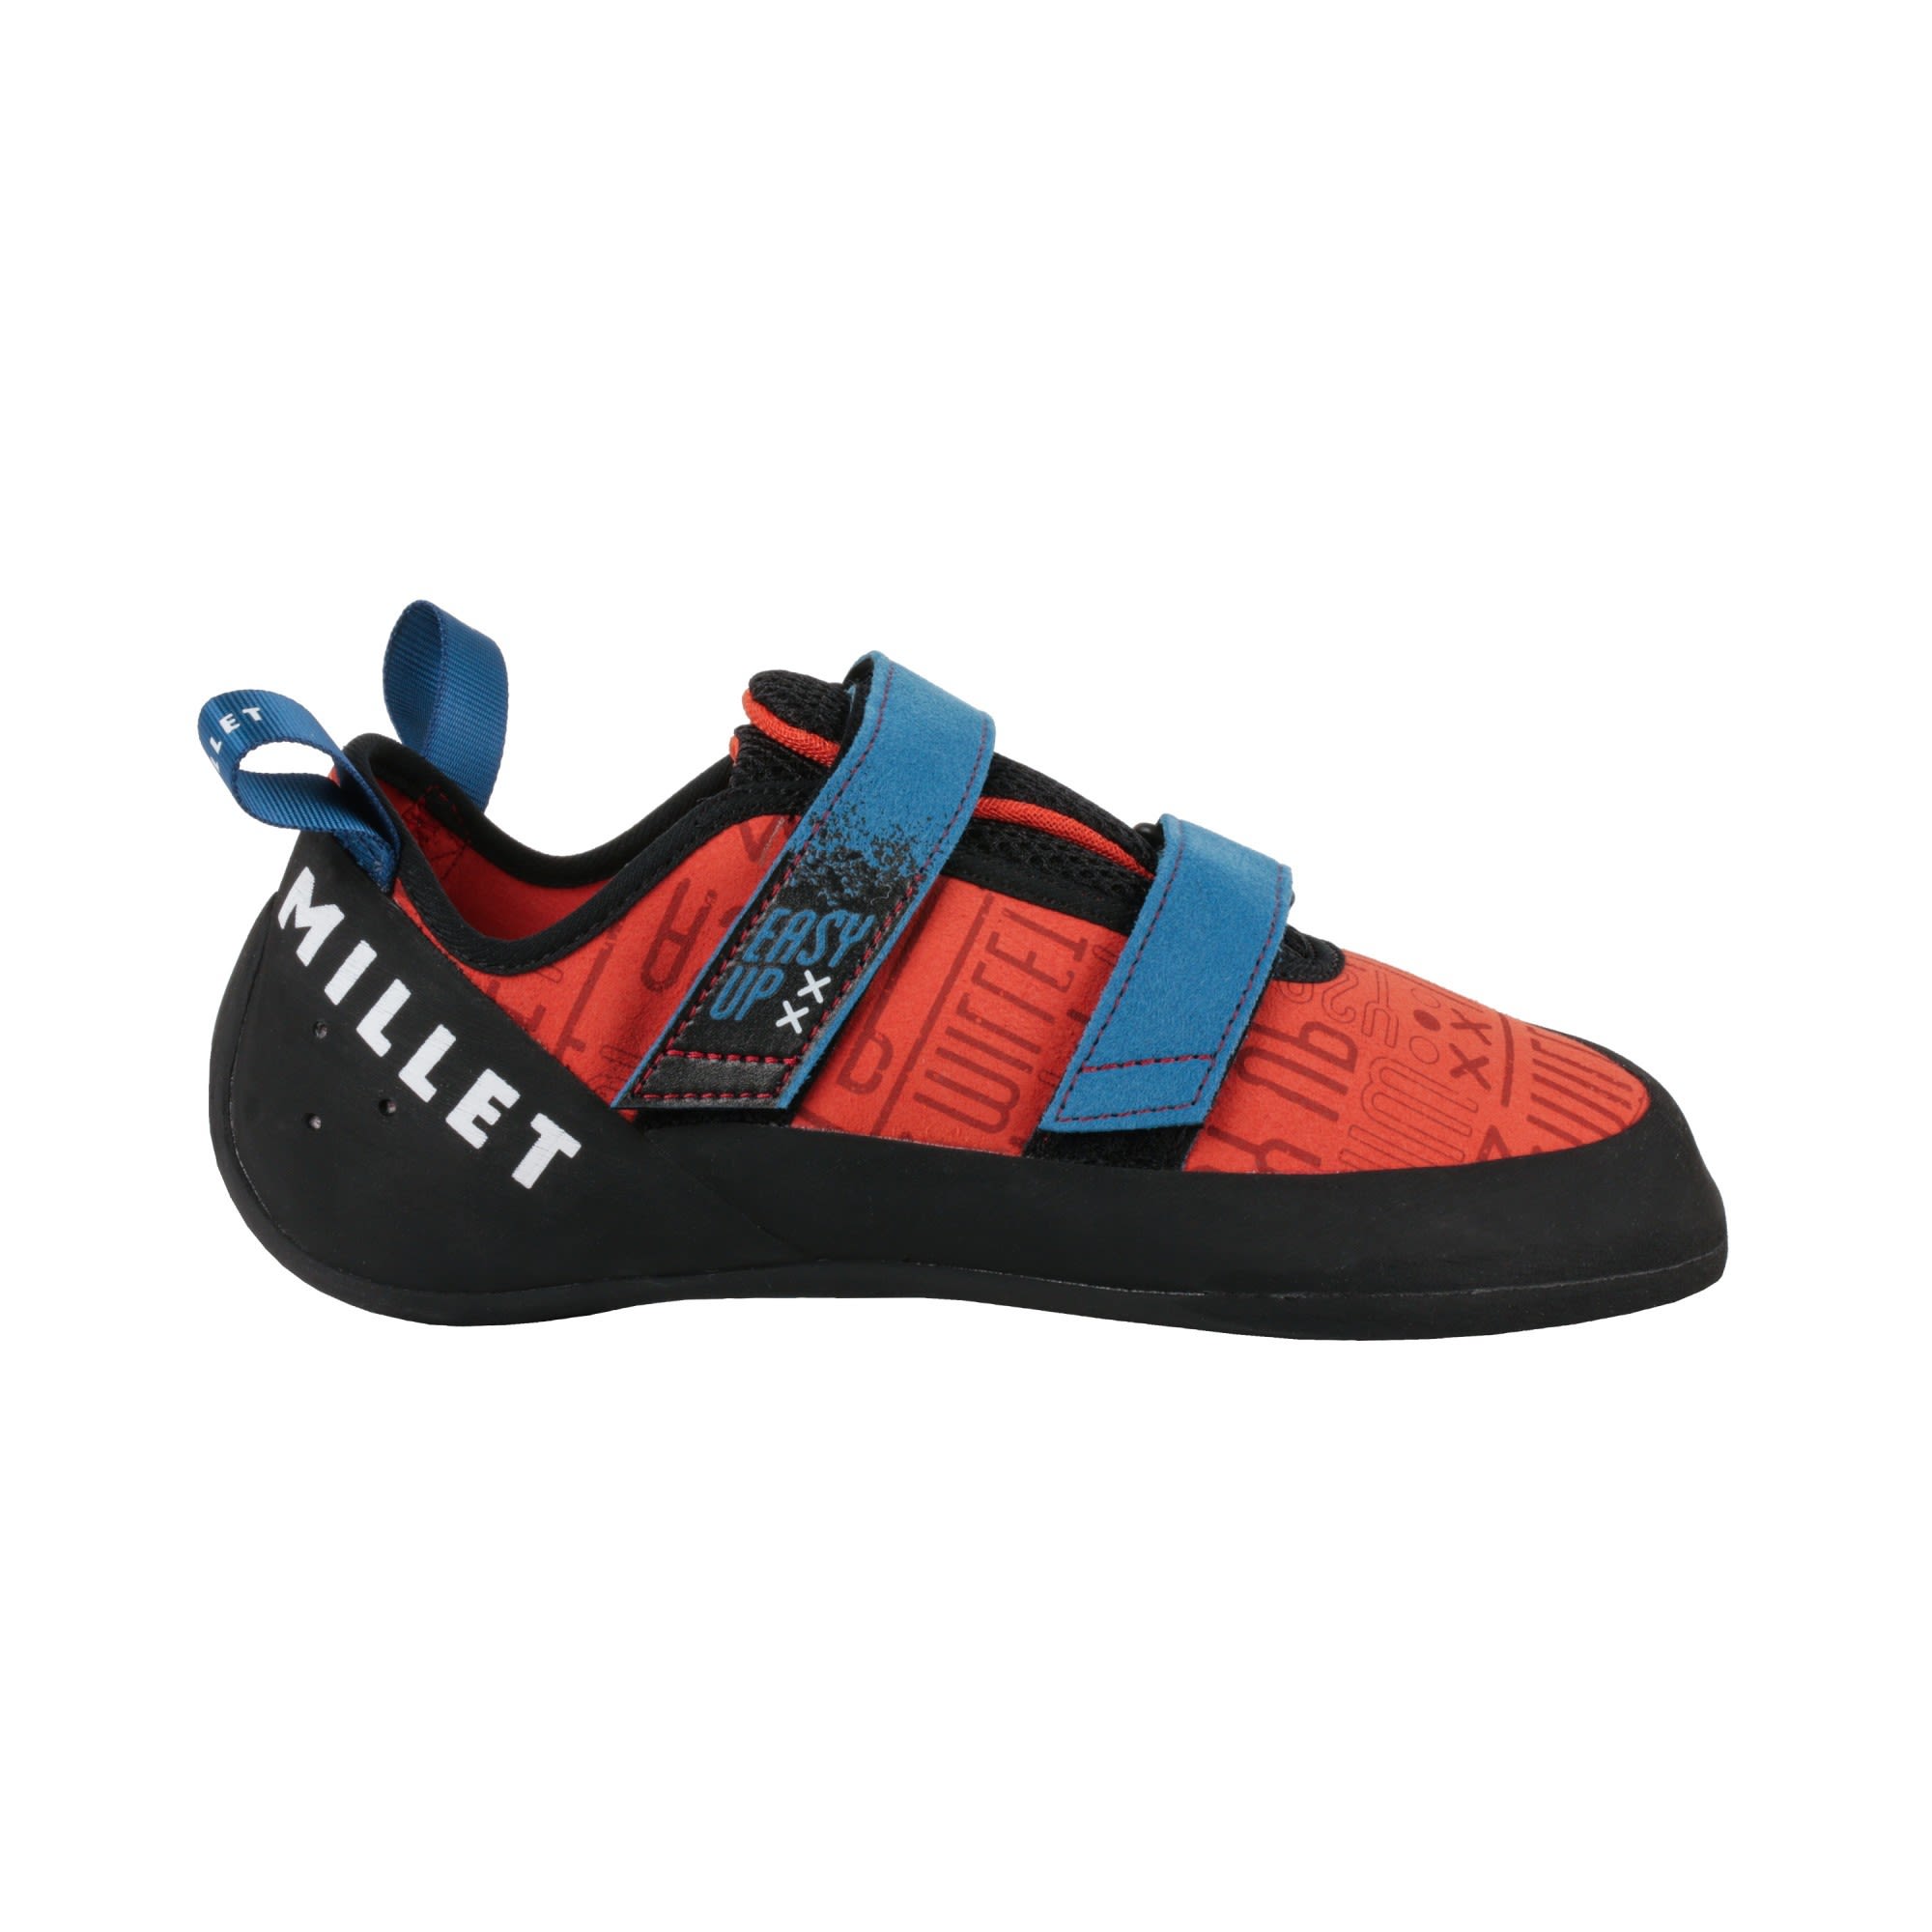 Millet Easy Up 5C Rot- Male Kletterschuhe- Grsse EU 39 - Farbe Chili